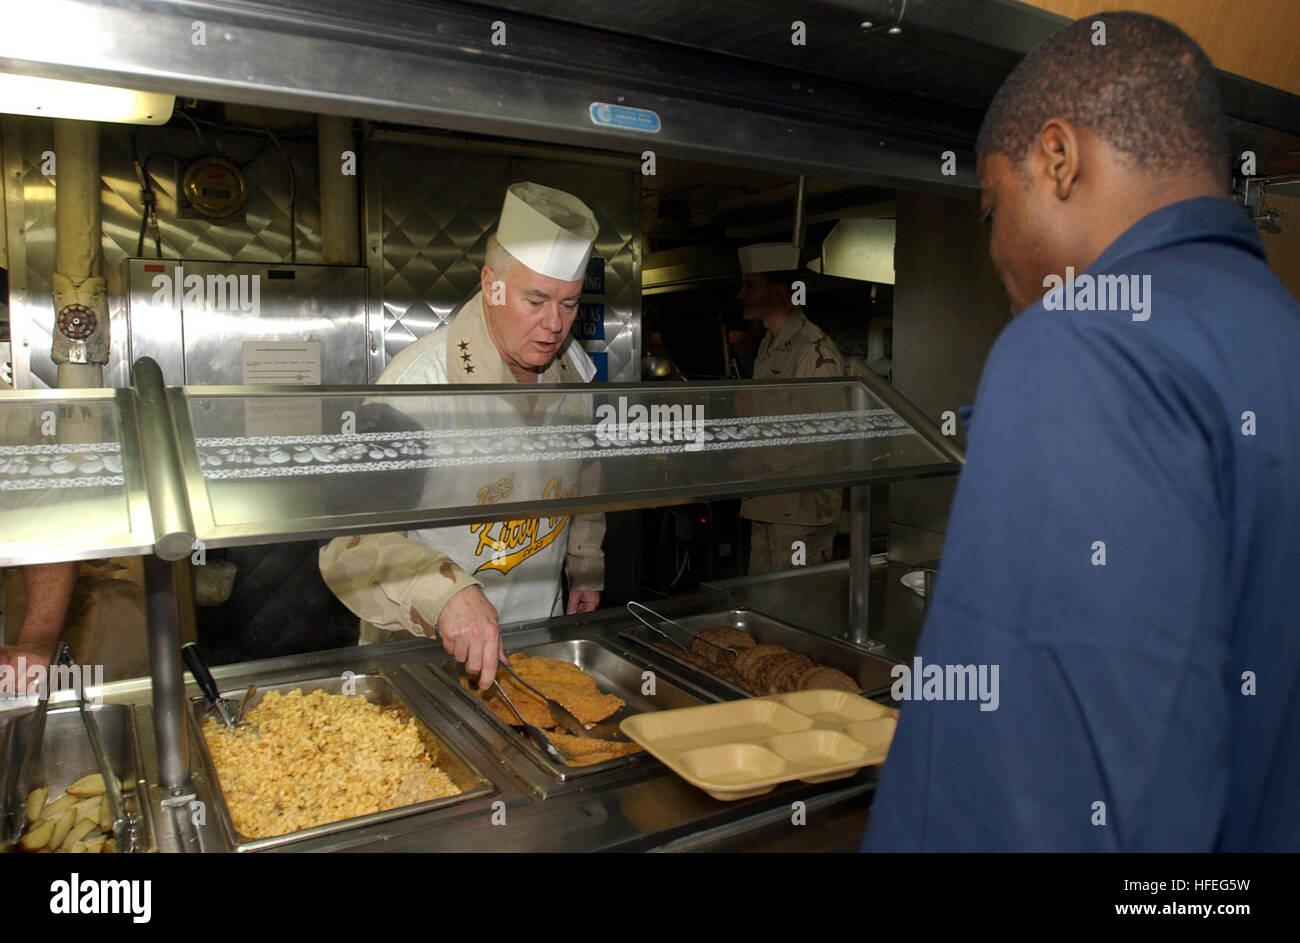 030301-N-0120R-009  Arabian Gulf (Mar. 1, 2003) -- Vice Adm. Timothy Keating, Commander, U.S. Naval Forces Central Command, pitches in and helps serve a meal to the crew during his resent tour of the aircraft carrier USS Kitty Hawk (CV 63). Kitty Hawk and its embarked Carrier Air Wing Five (CVW-5) is operating with coalition forces in the Arabian Gulf and is the worldÕs only permanently forward-deployed aircraft carrier and operates out of Yokosuka, Japan.  U.S. Navy photo by PhotographerÕs Mate 3rd Class William H. Ramsey.  (RELEASED) US Navy 030301-N-0120R-009 Vadm. Keating visits USS Kitty  Stock Photo